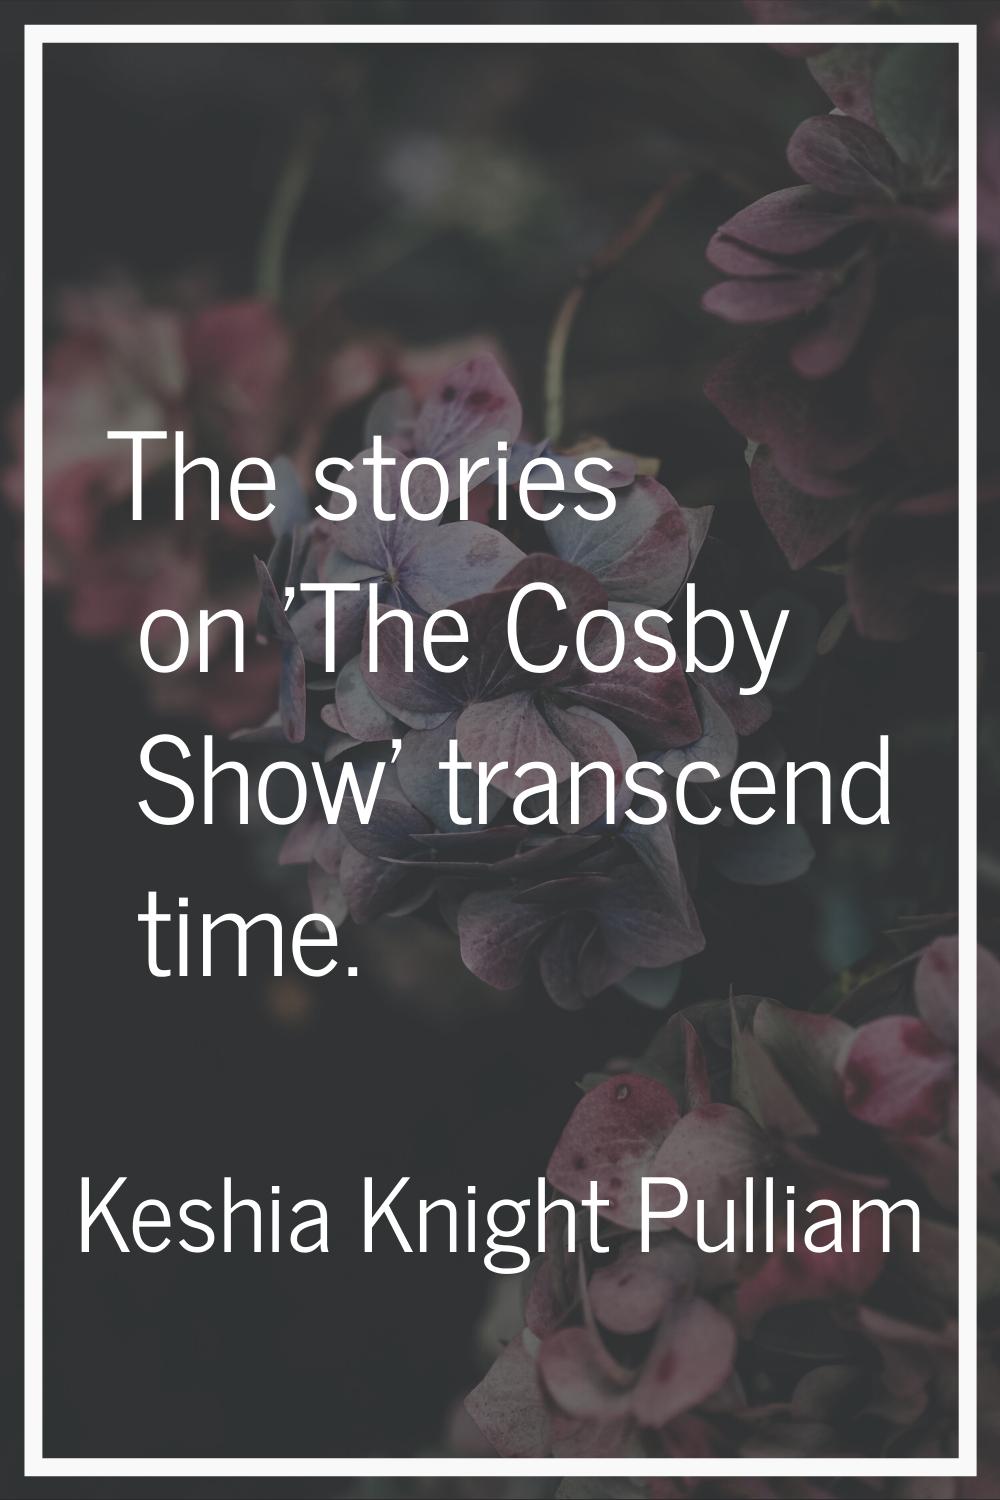 The stories on 'The Cosby Show' transcend time.